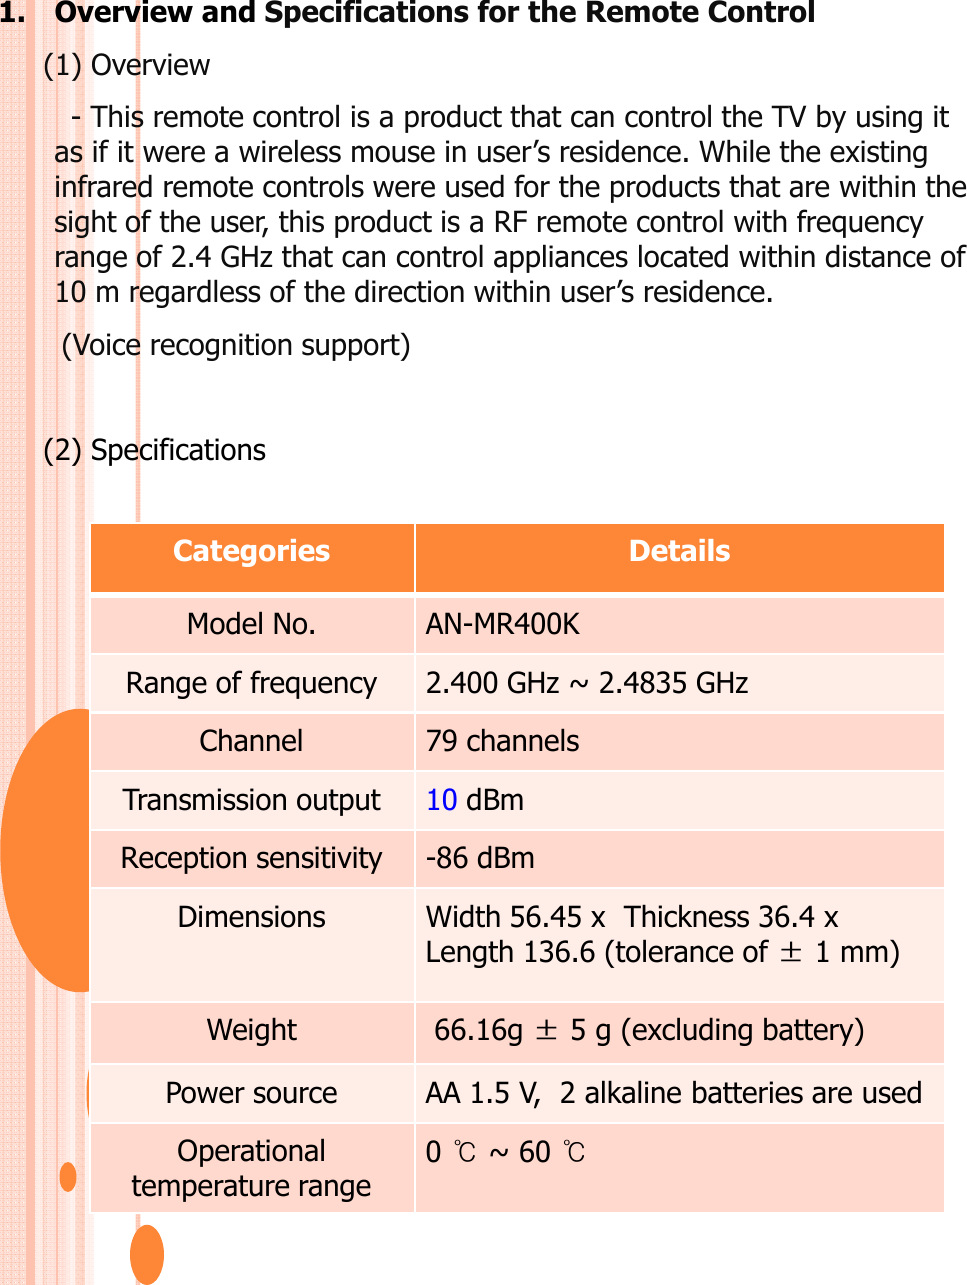 1. Overview and Specifications for the Remote Control(1) Overview- This remote control is a product that can control the TV by using it as if it were a wireless mouse in user’s residence. While the existing  infrared remote controls were used for the products that are within the sight of the user, this product is a RF remote control with frequency range of 2.4 GHz that can control appliances located within distance of 10 m regardless of the direction within user’s residence. (Voice recognition support)(2) SpecificationsCategories DetailsModel No. AN-MR400KRange of frequency 2.400 GHz ~ 2.4835 GHzChannel 79 channelsTransmission output 10 dBmReception sensitivity -86 dBmDimensions Width 56.45 x Thickness 36.4 x Length 136.6 (tolerance of ±1 mm) Weight 66.16g ±5 g (excluding battery)Power source AA 1.5 V,  2 alkaline batteries are usedOperational temperature range 0 ℃~ 60 ℃